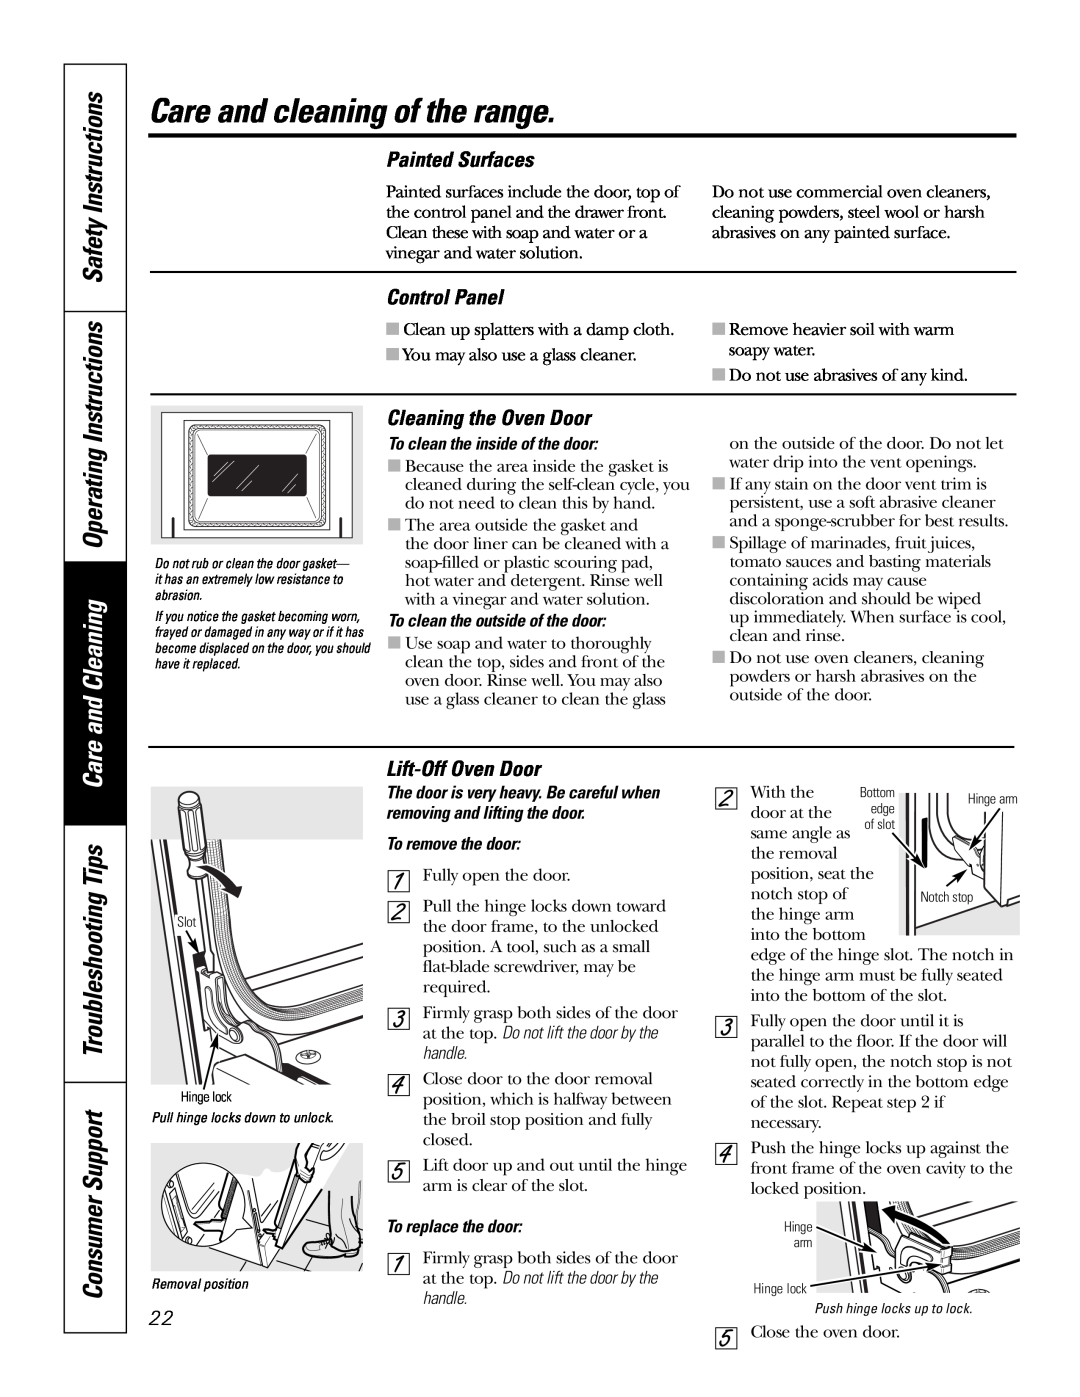 GE JSP46 Instructions Safety Instructions, and Cleaning Operating, Consumer Support Troubleshooting Tips Care, handle 